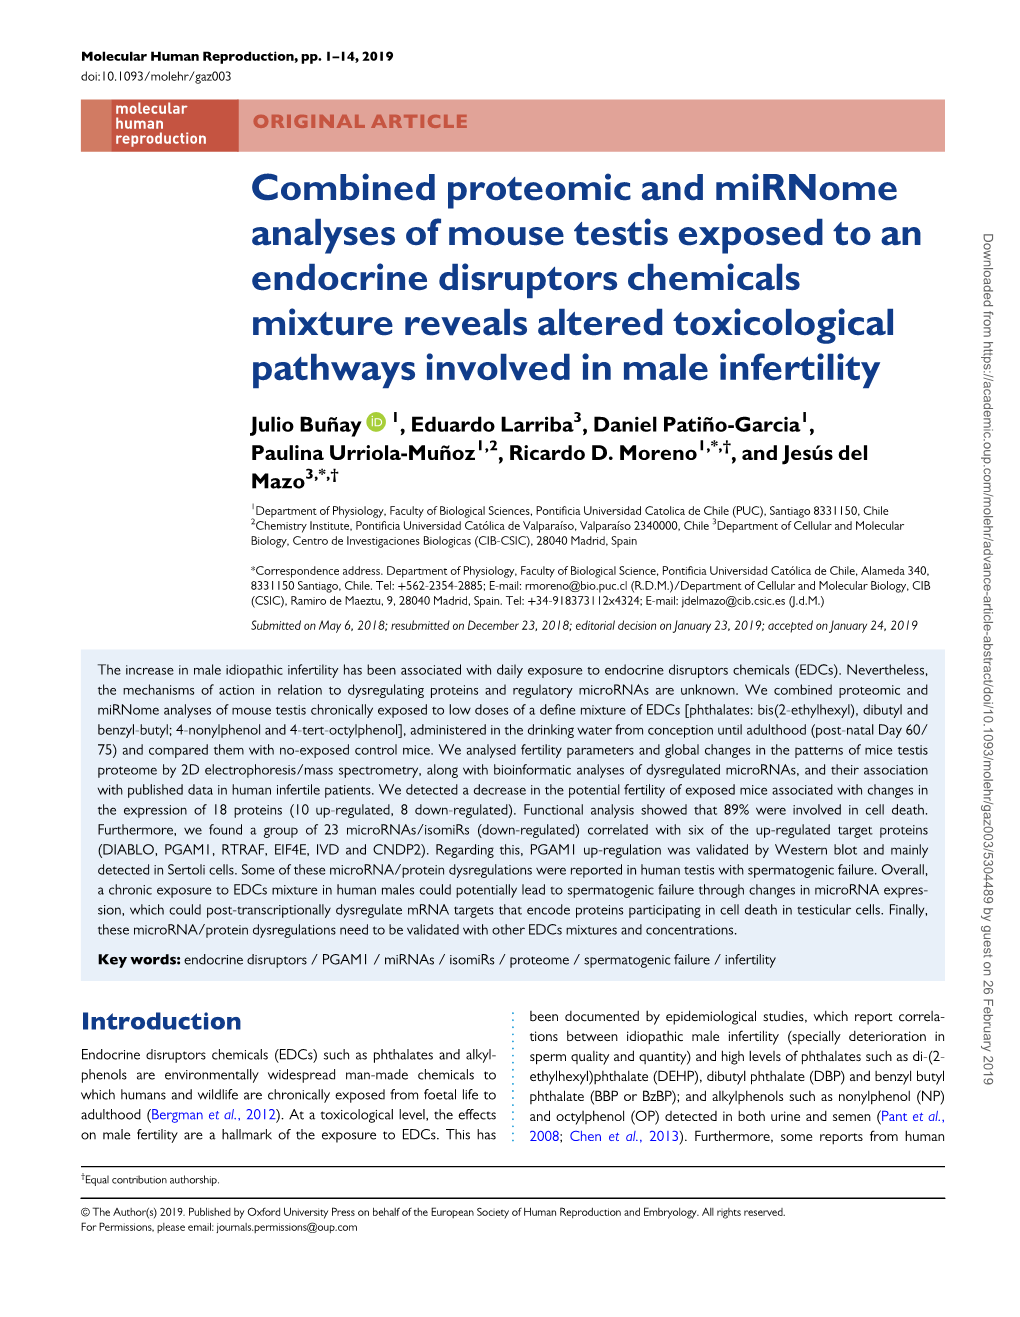 Combined Proteomic and Mirnome Analyses of Mouse Testis Exposed